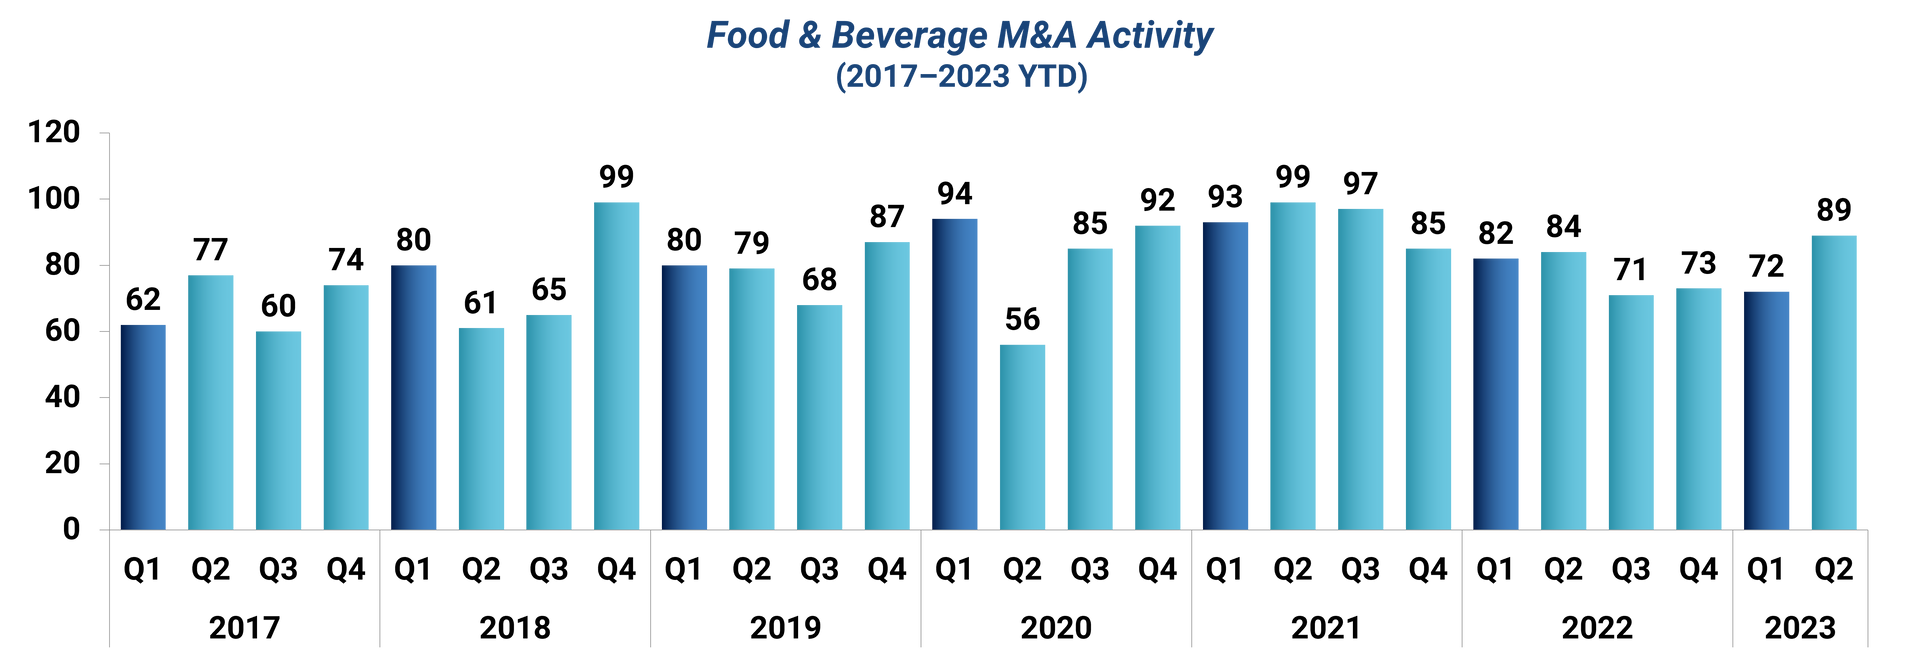 A bar chart depicting food and beverage M&A activity from 2017-2023.